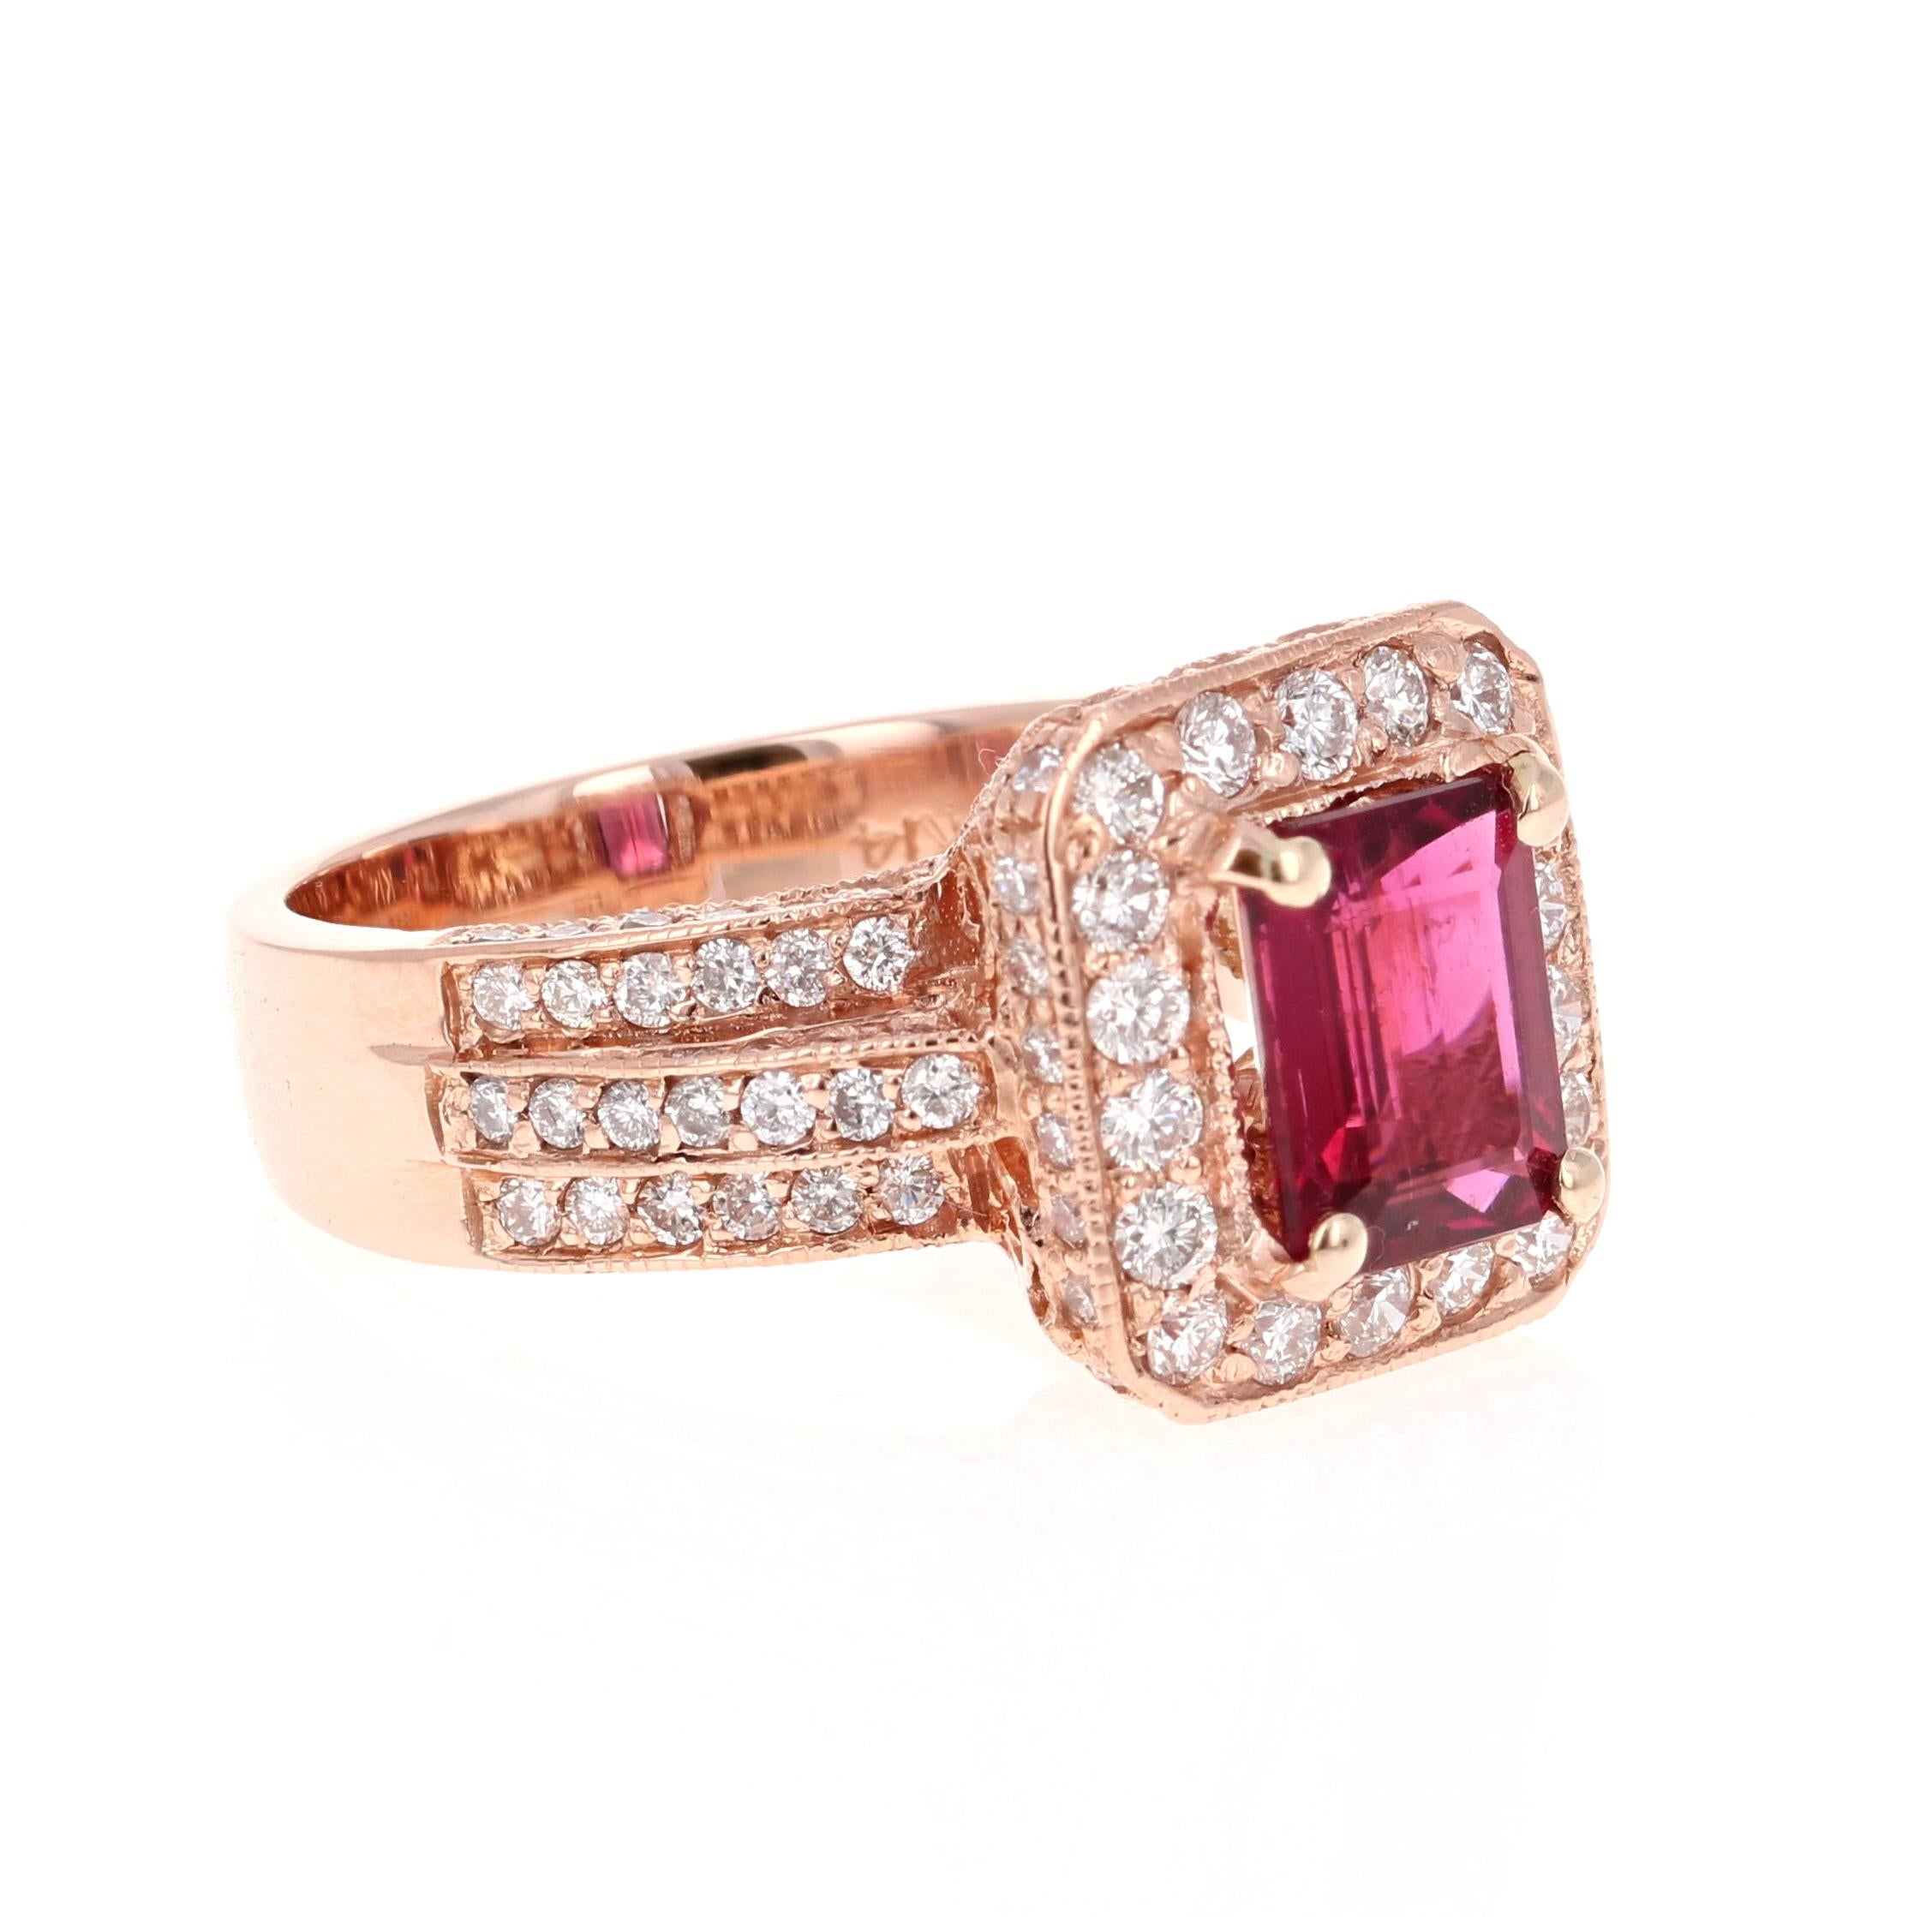 A Stunner!! The most elegant and unique ring to add to your collection! 

This beauty has a Emerald Cut Pink Tourmaline that weighs 1.84 Carats. It has 140 Round Cut Diamonds that weigh 1.62 Carats. The clarity and color of the diamonds are VS-F.